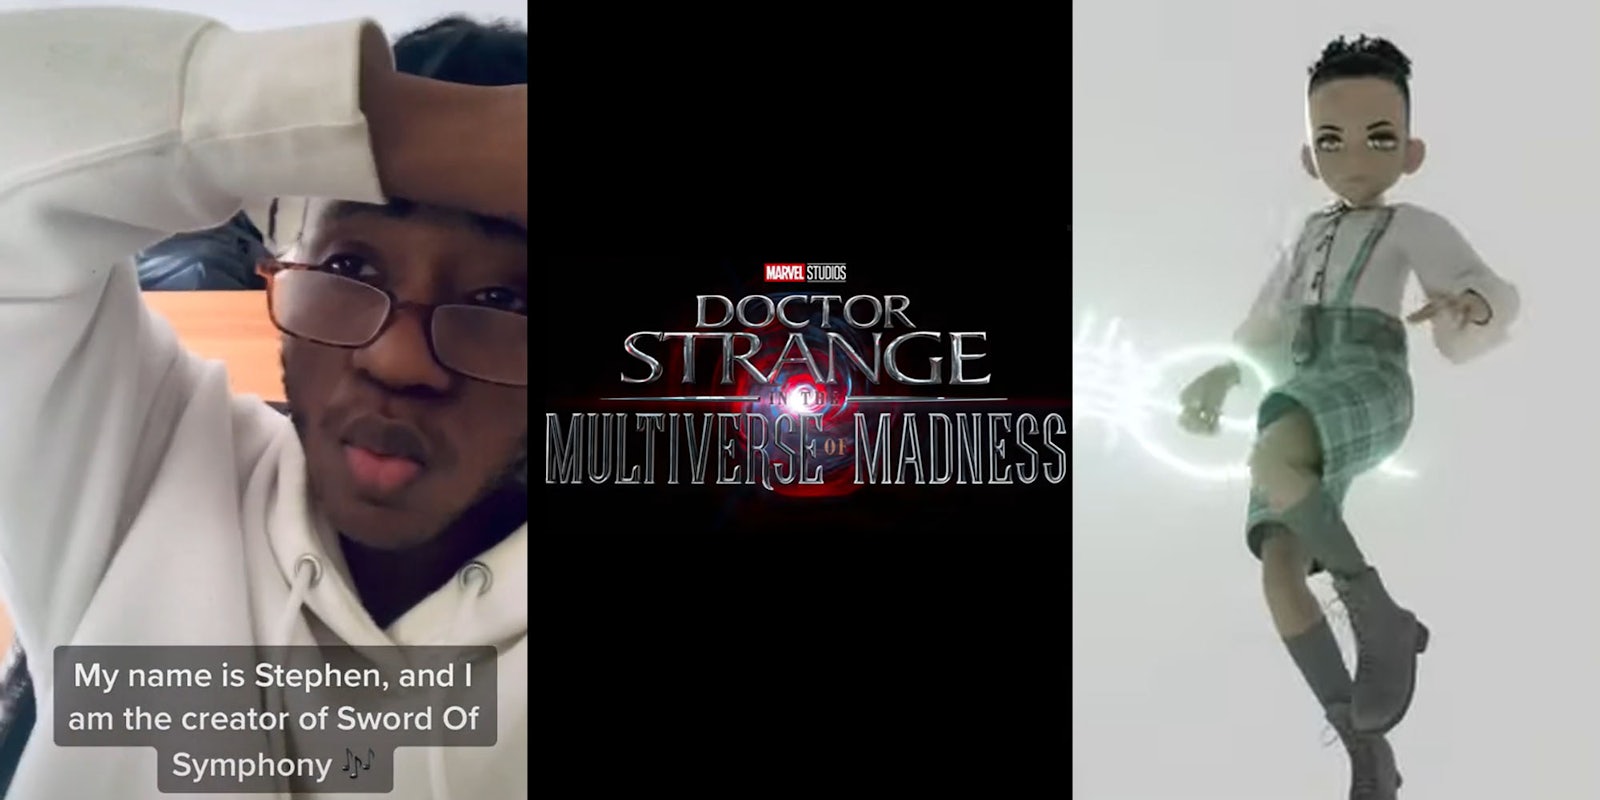 Man holding arm up to head caption 'My name is Stephen, and I am the creator of Sword of Symphony (l) Doctor Strange in the Multiverse of Madness trailer logo on black background (c) Sword Of Symphony animated character on white background (r)